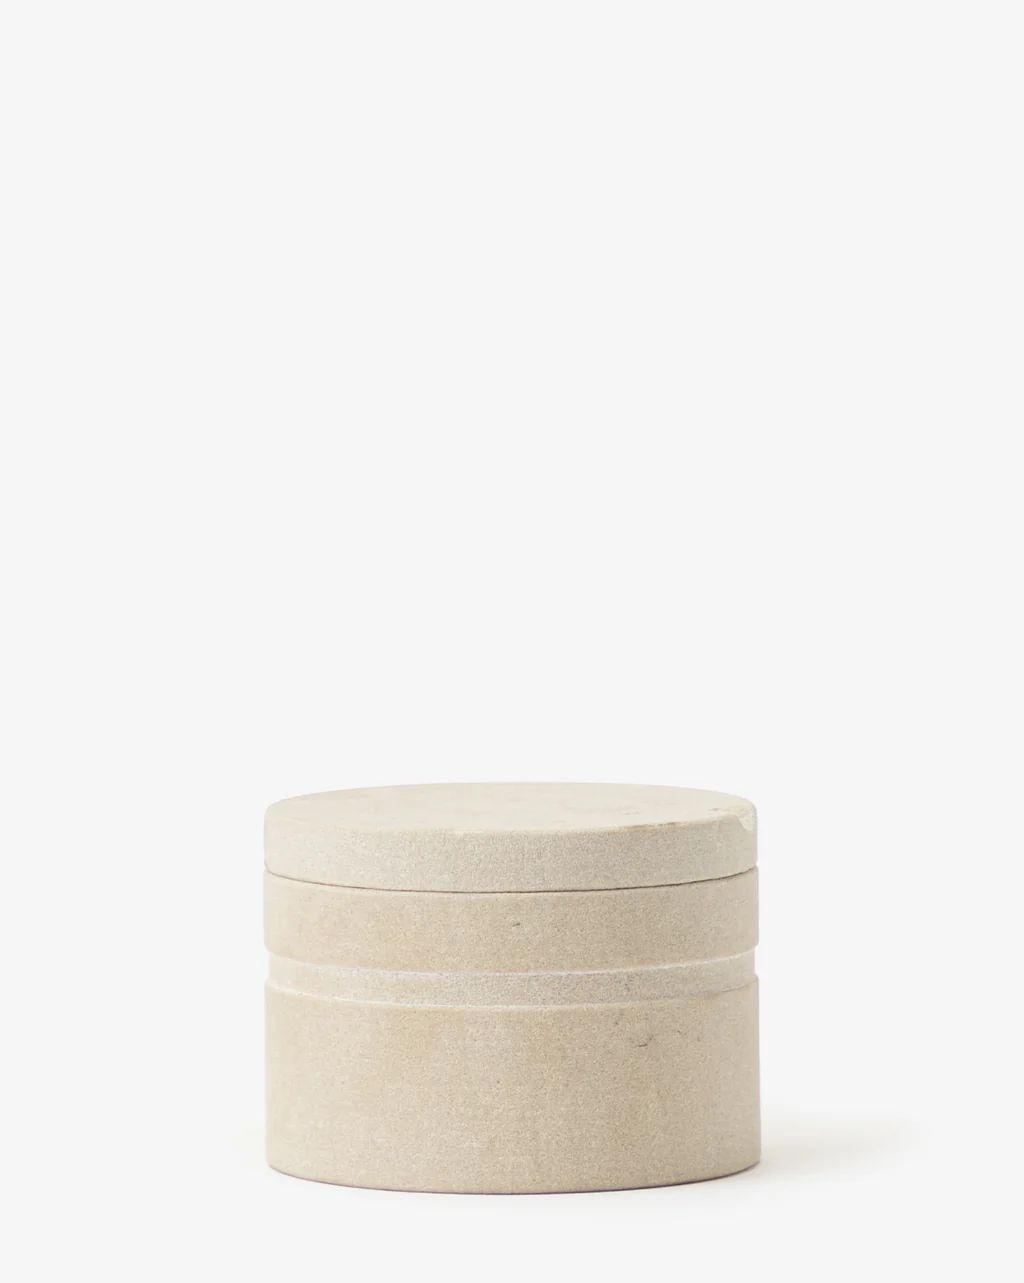 Barton Sandstone Canister | McGee & Co.